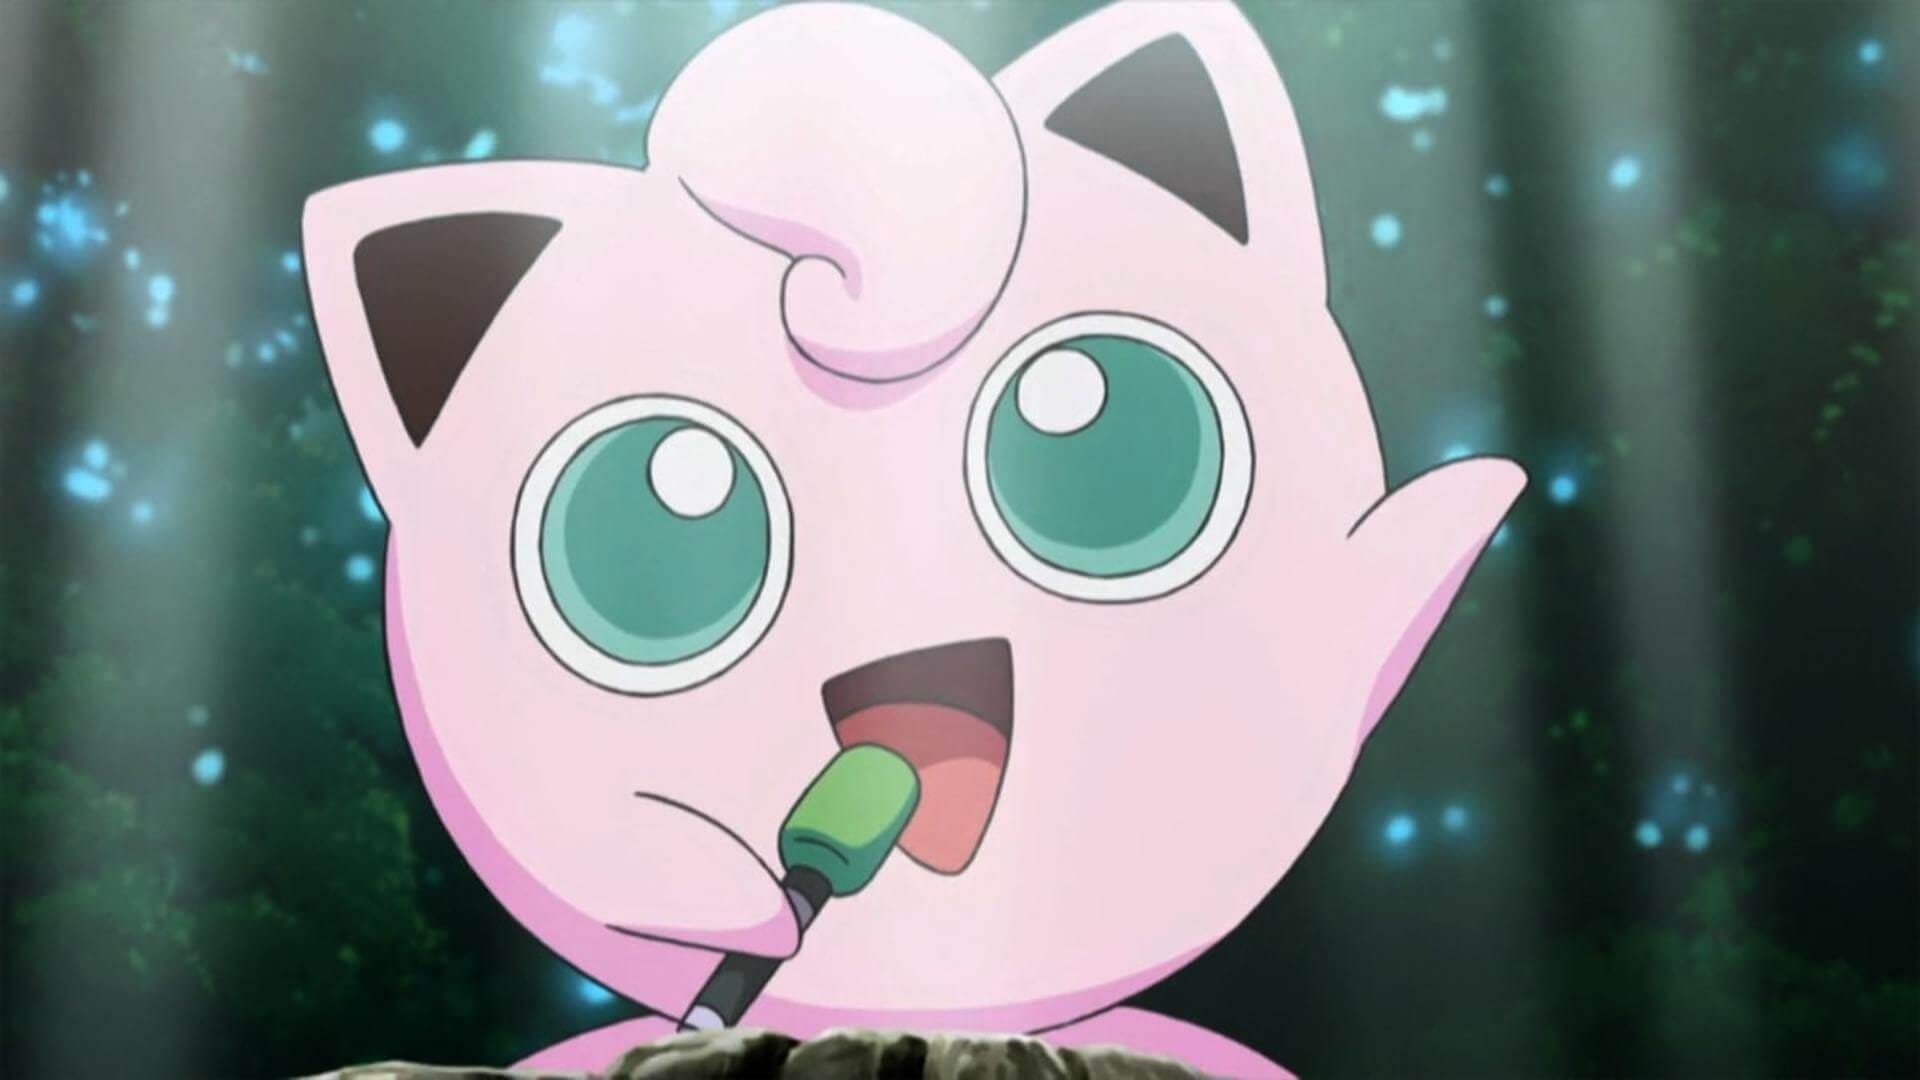 Jigglypuff, one of the Pokemon that shows up in the music video for Take It Home.